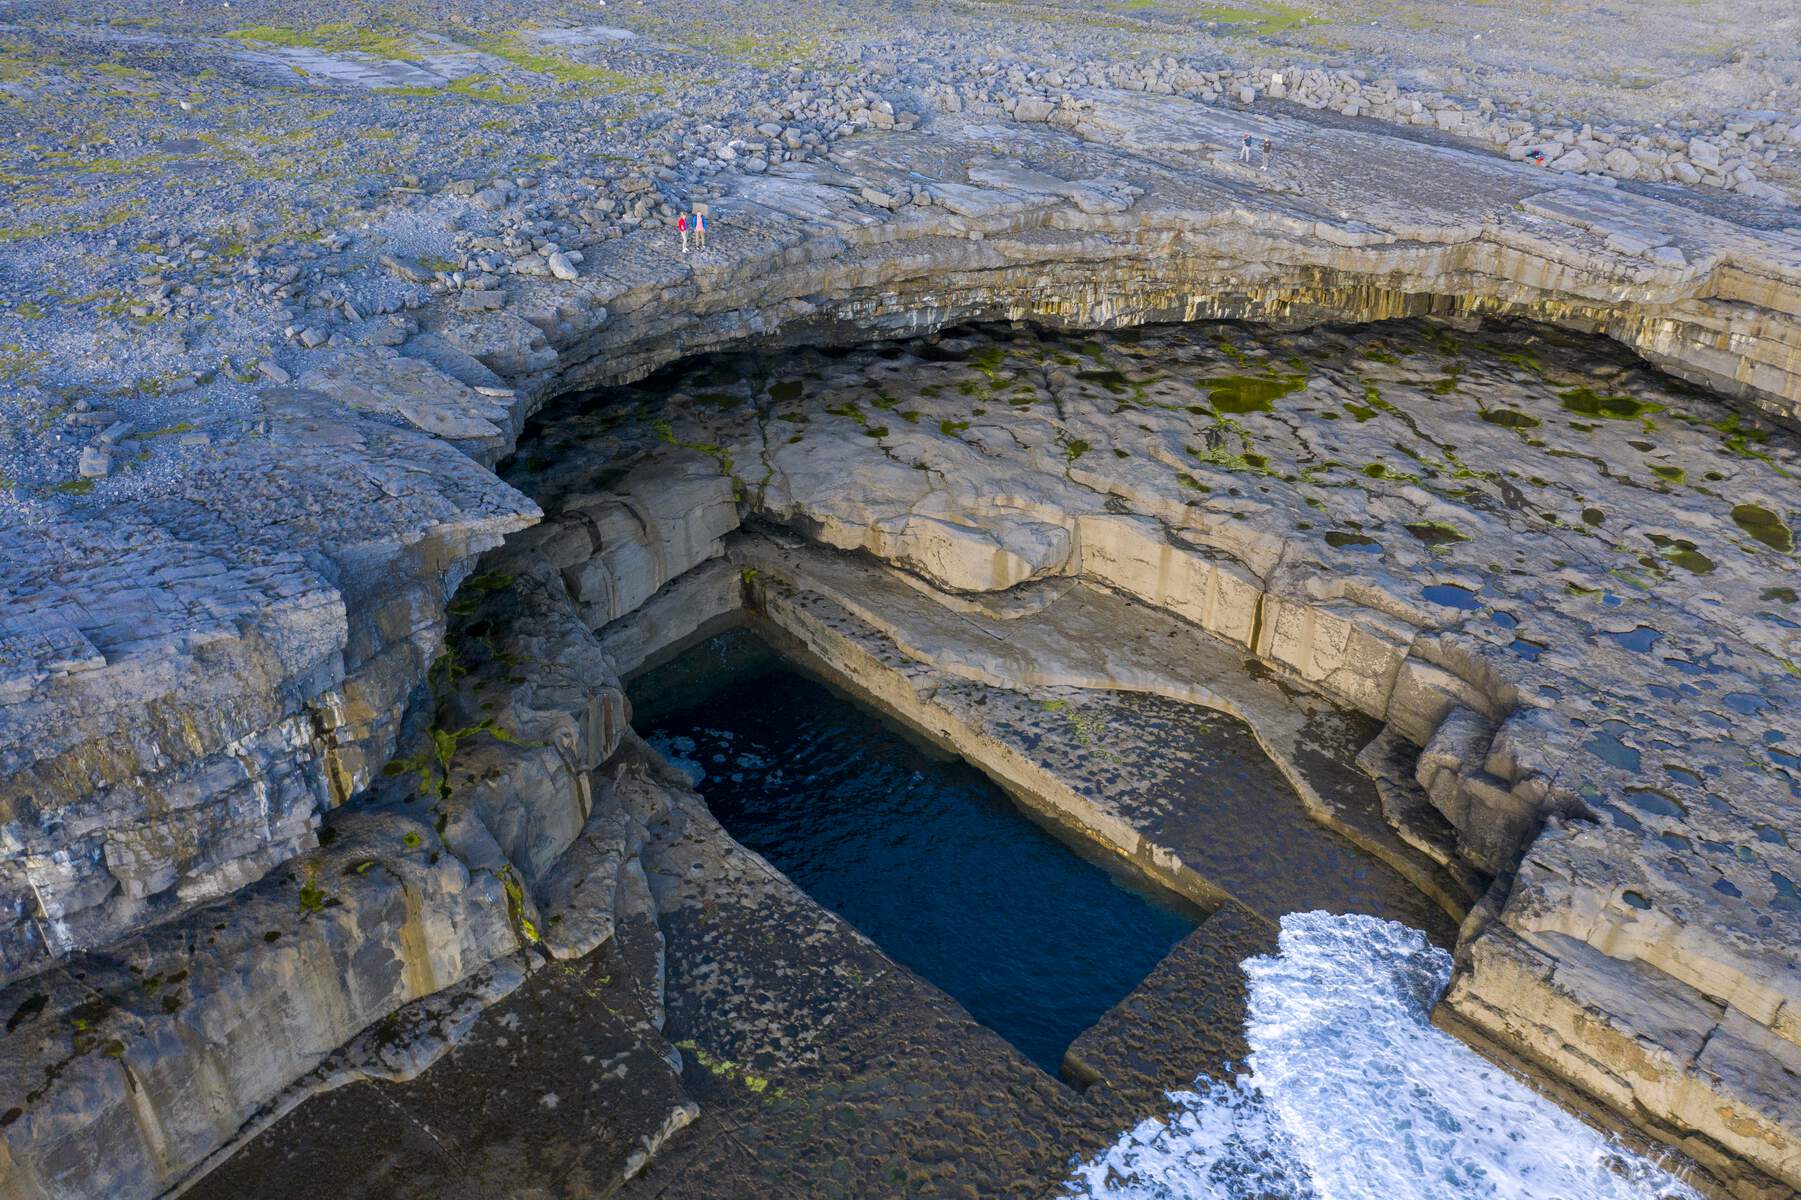 Le Worm Hole sur Inishmore, îles Aran, Galway, Irlande